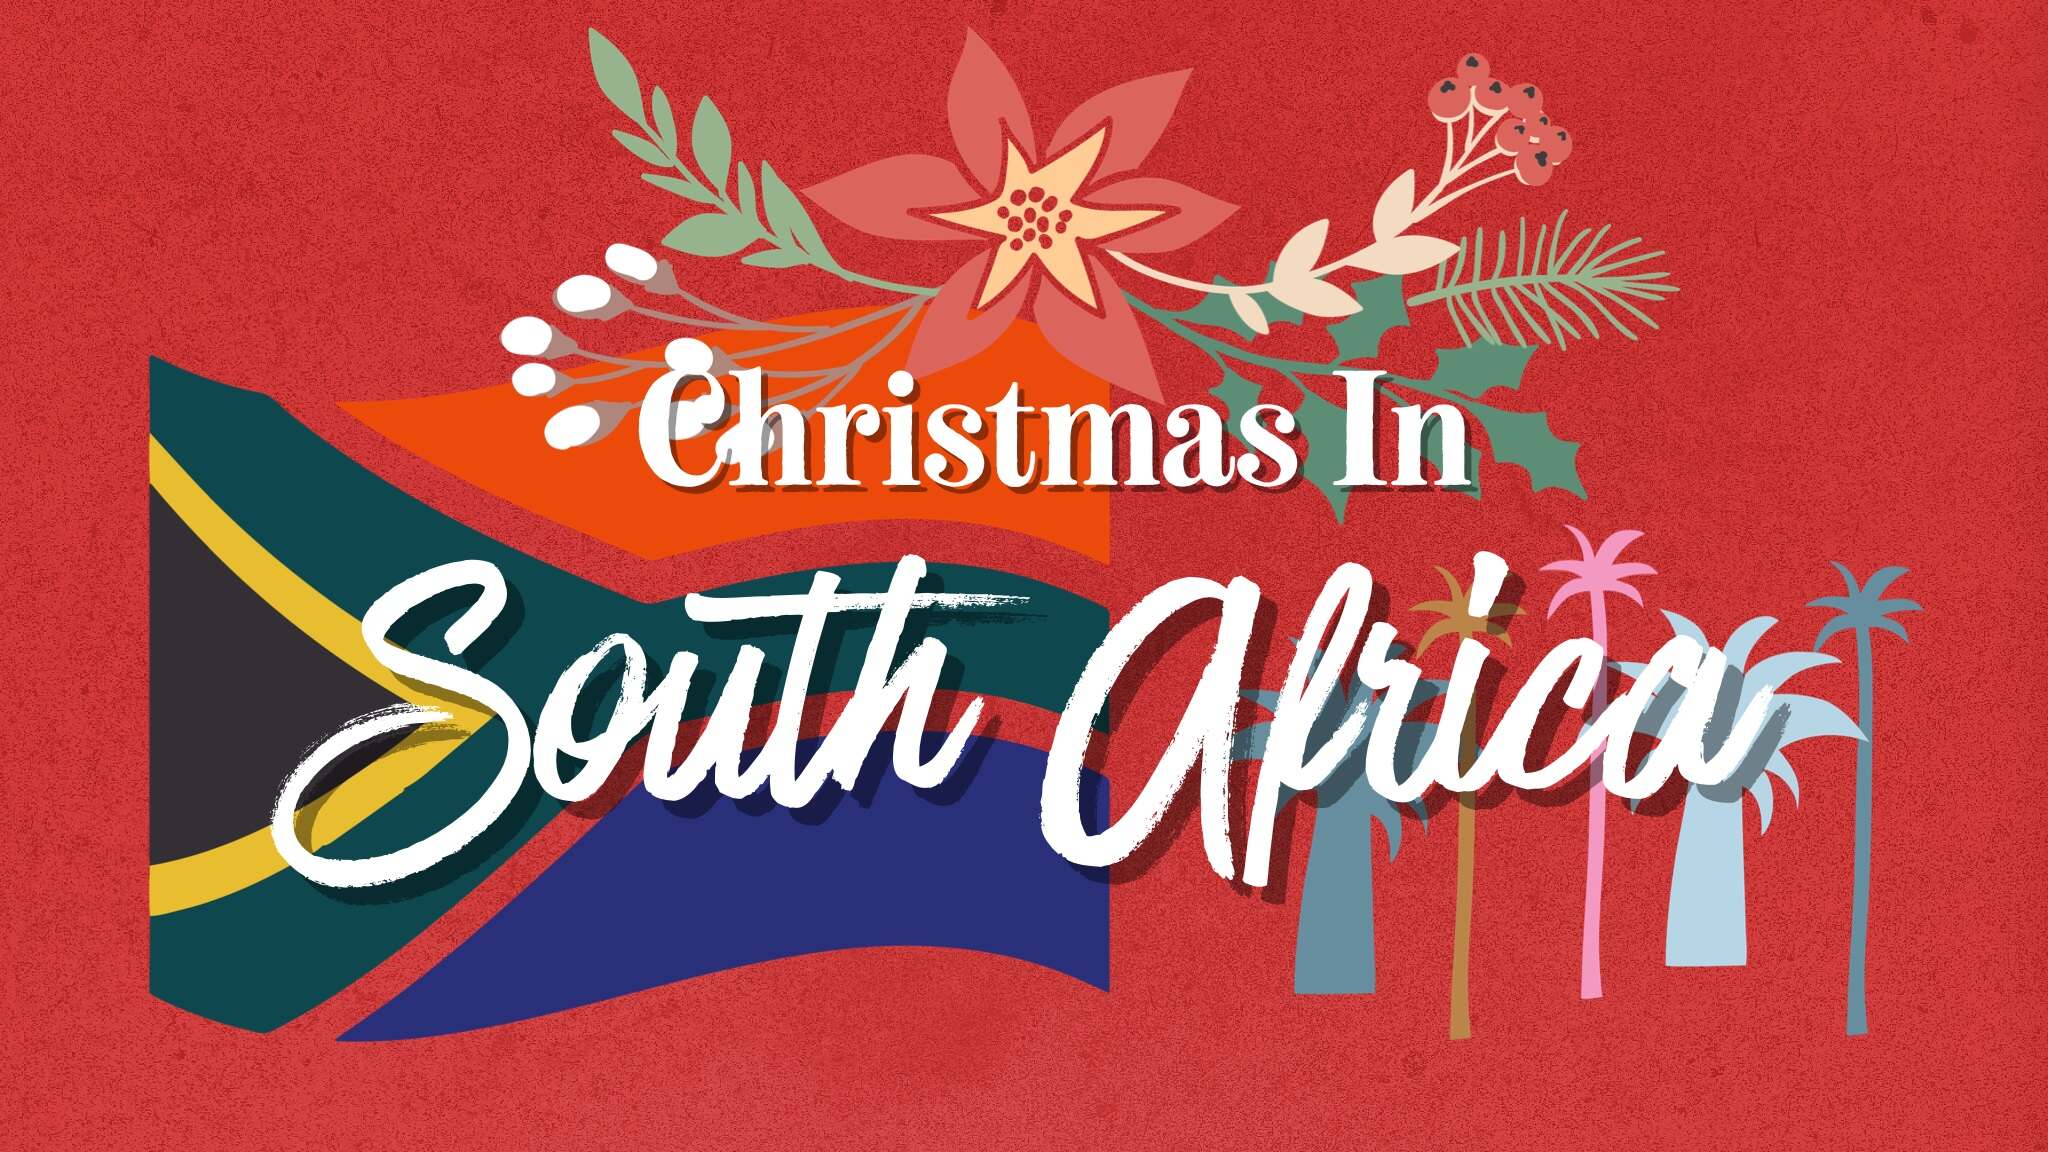 15-south-africa-christmas-facts